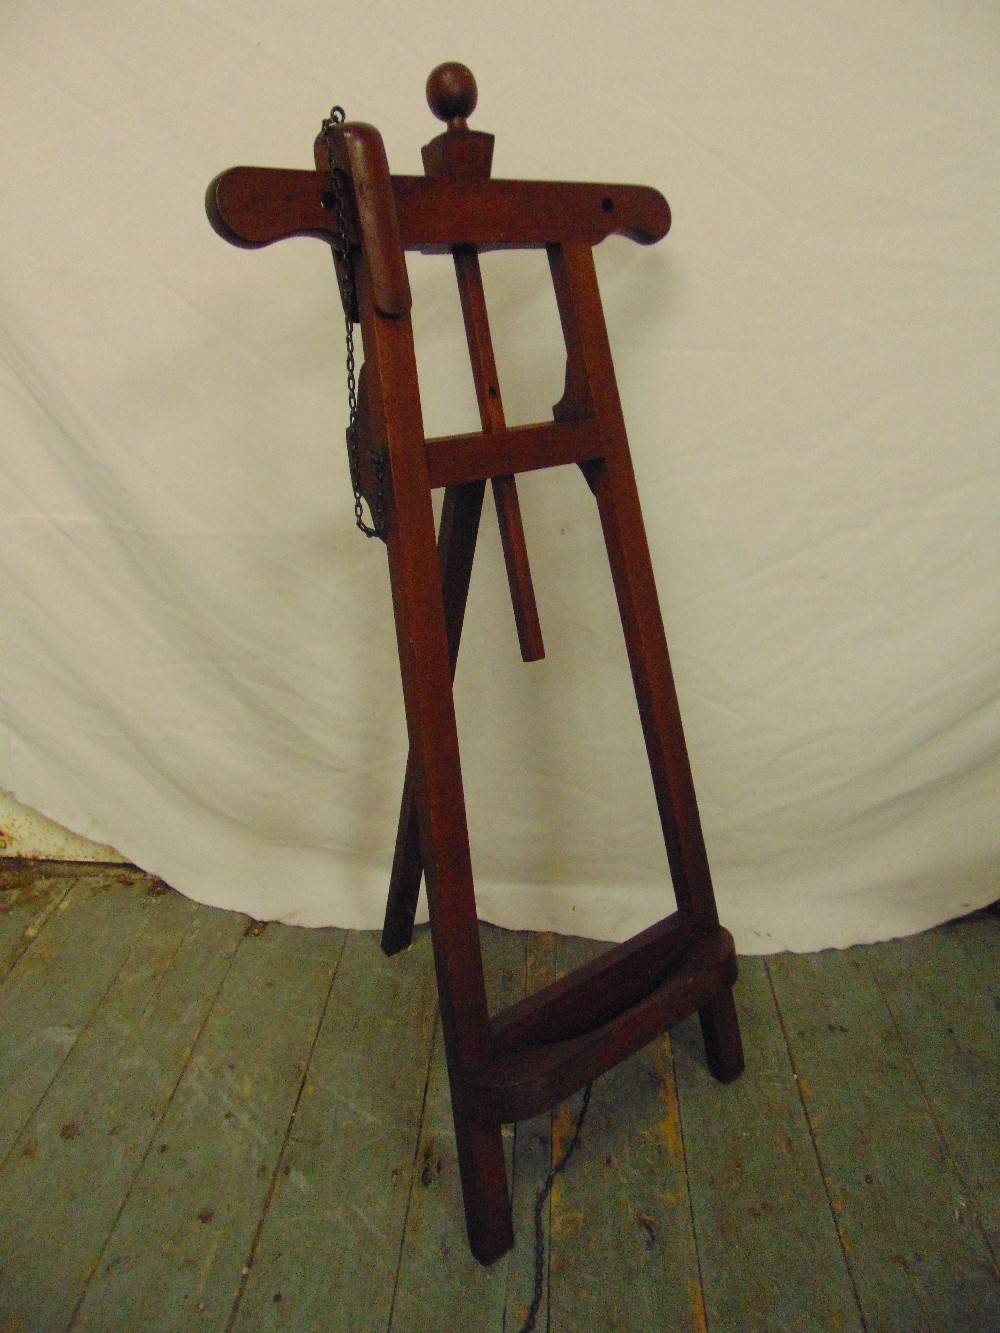 Mahogany table top easel with hinged strut